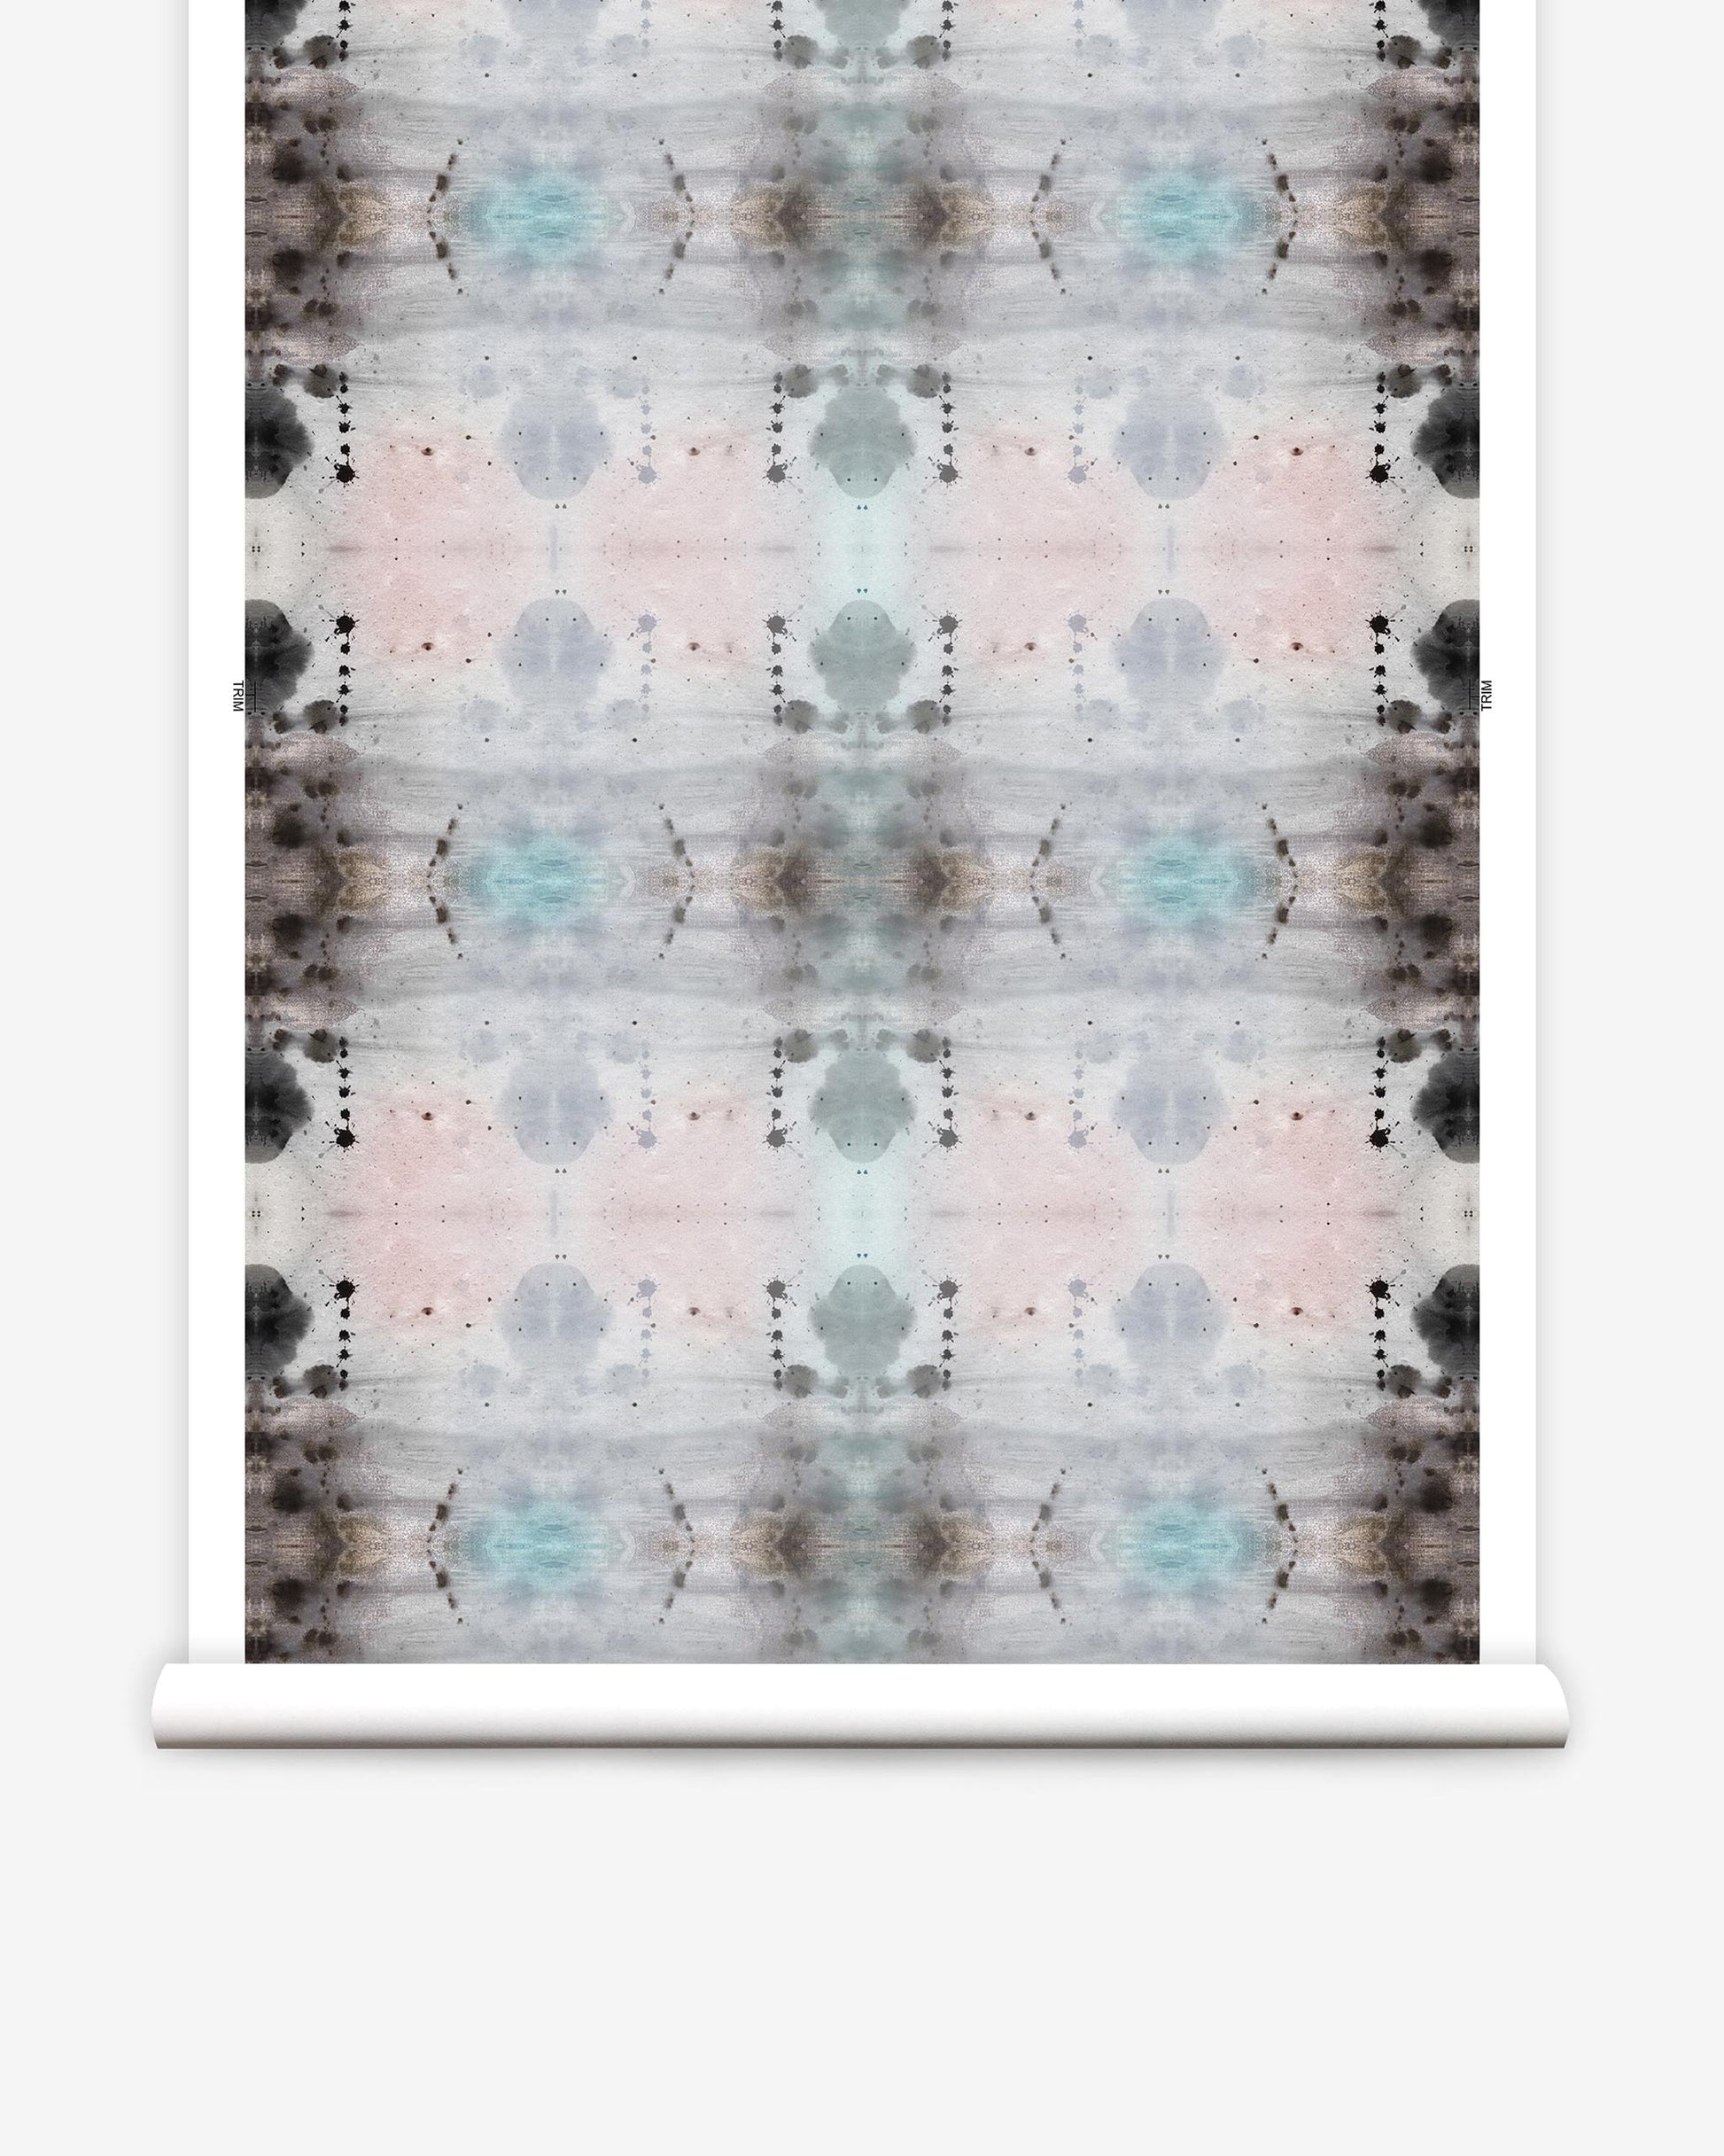 A Shakya Wallpaper Dusk with an abstract pattern on it, depicting the celestial world